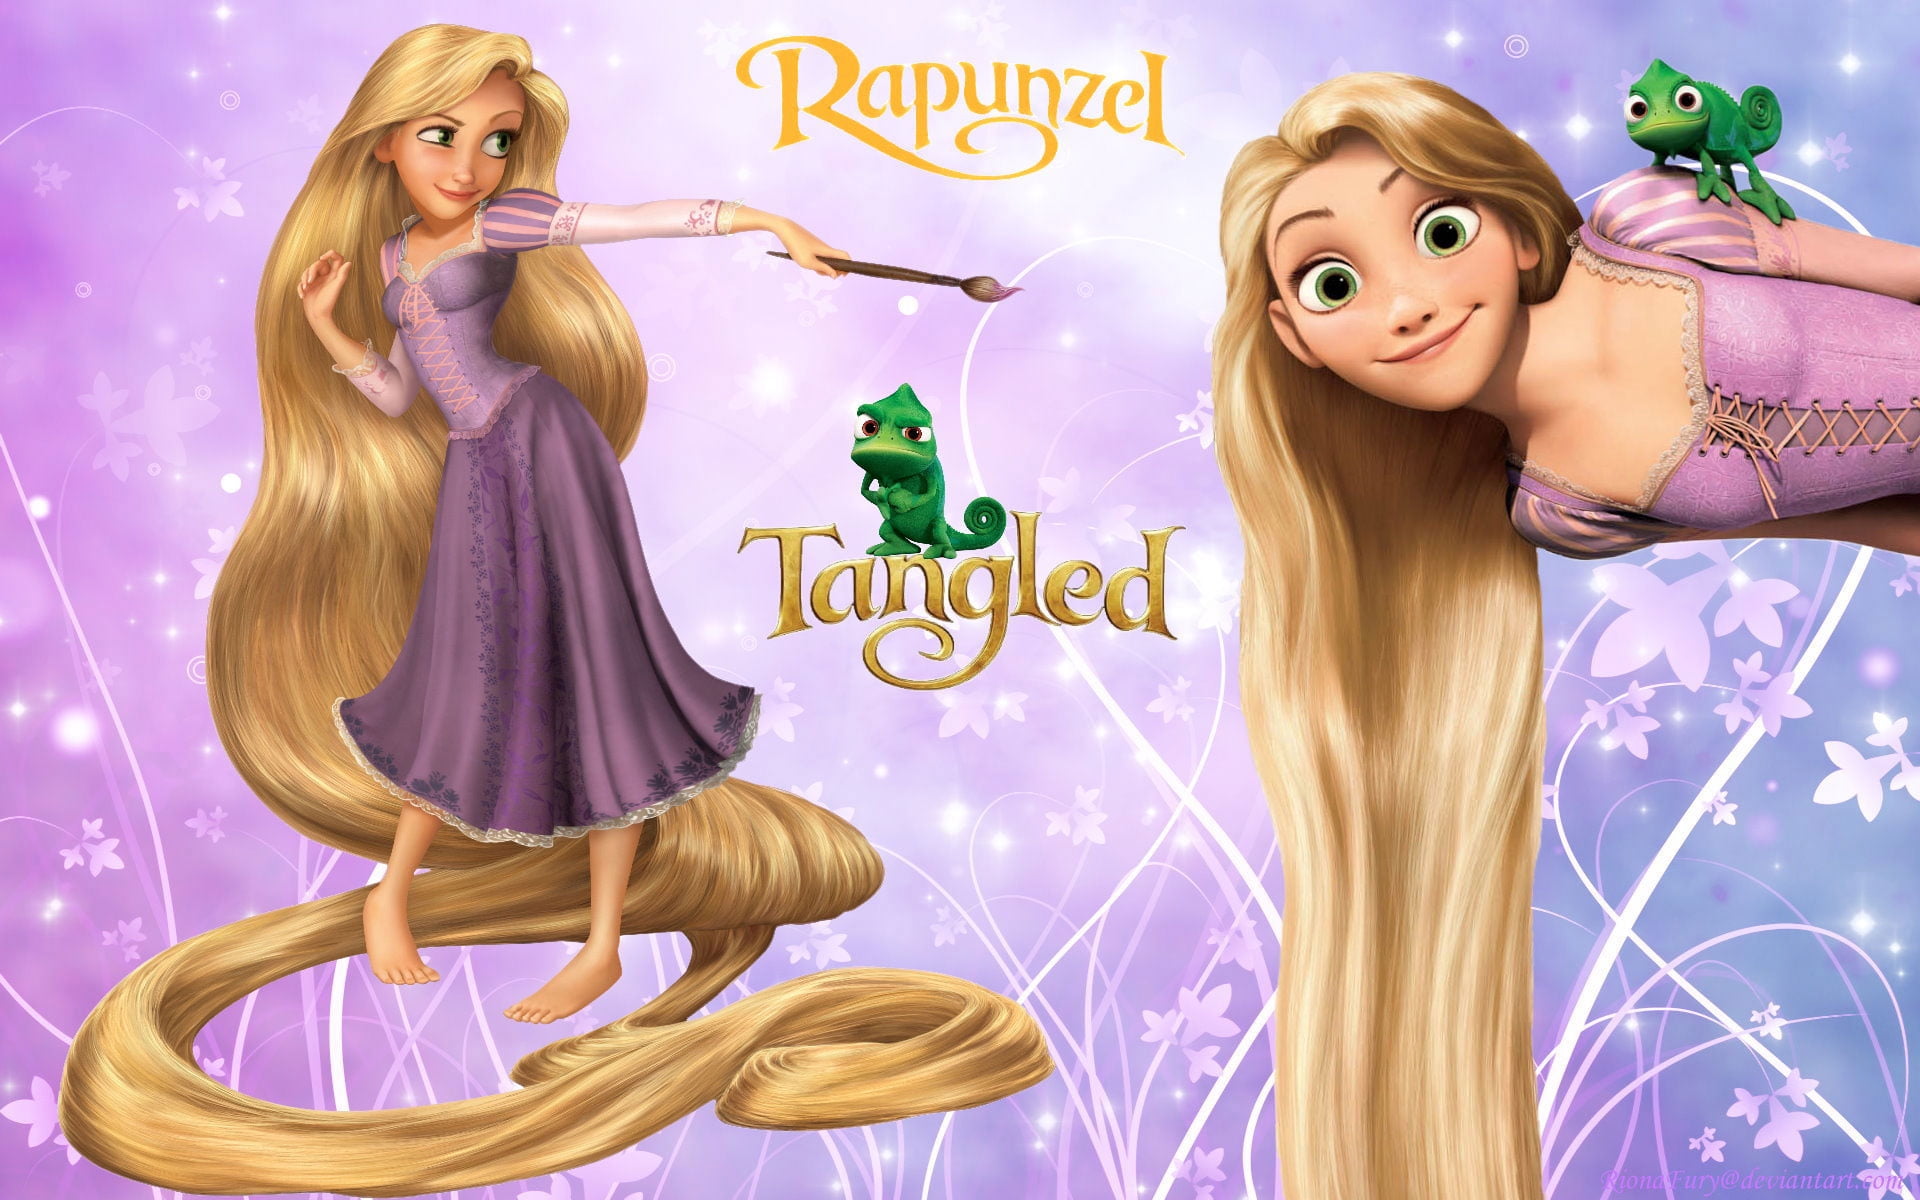 DISNEY TANGLED PRINCESS RAPUNZEL TOWER EDIBLE ICING CAKE TOPPER MANY SIZES 